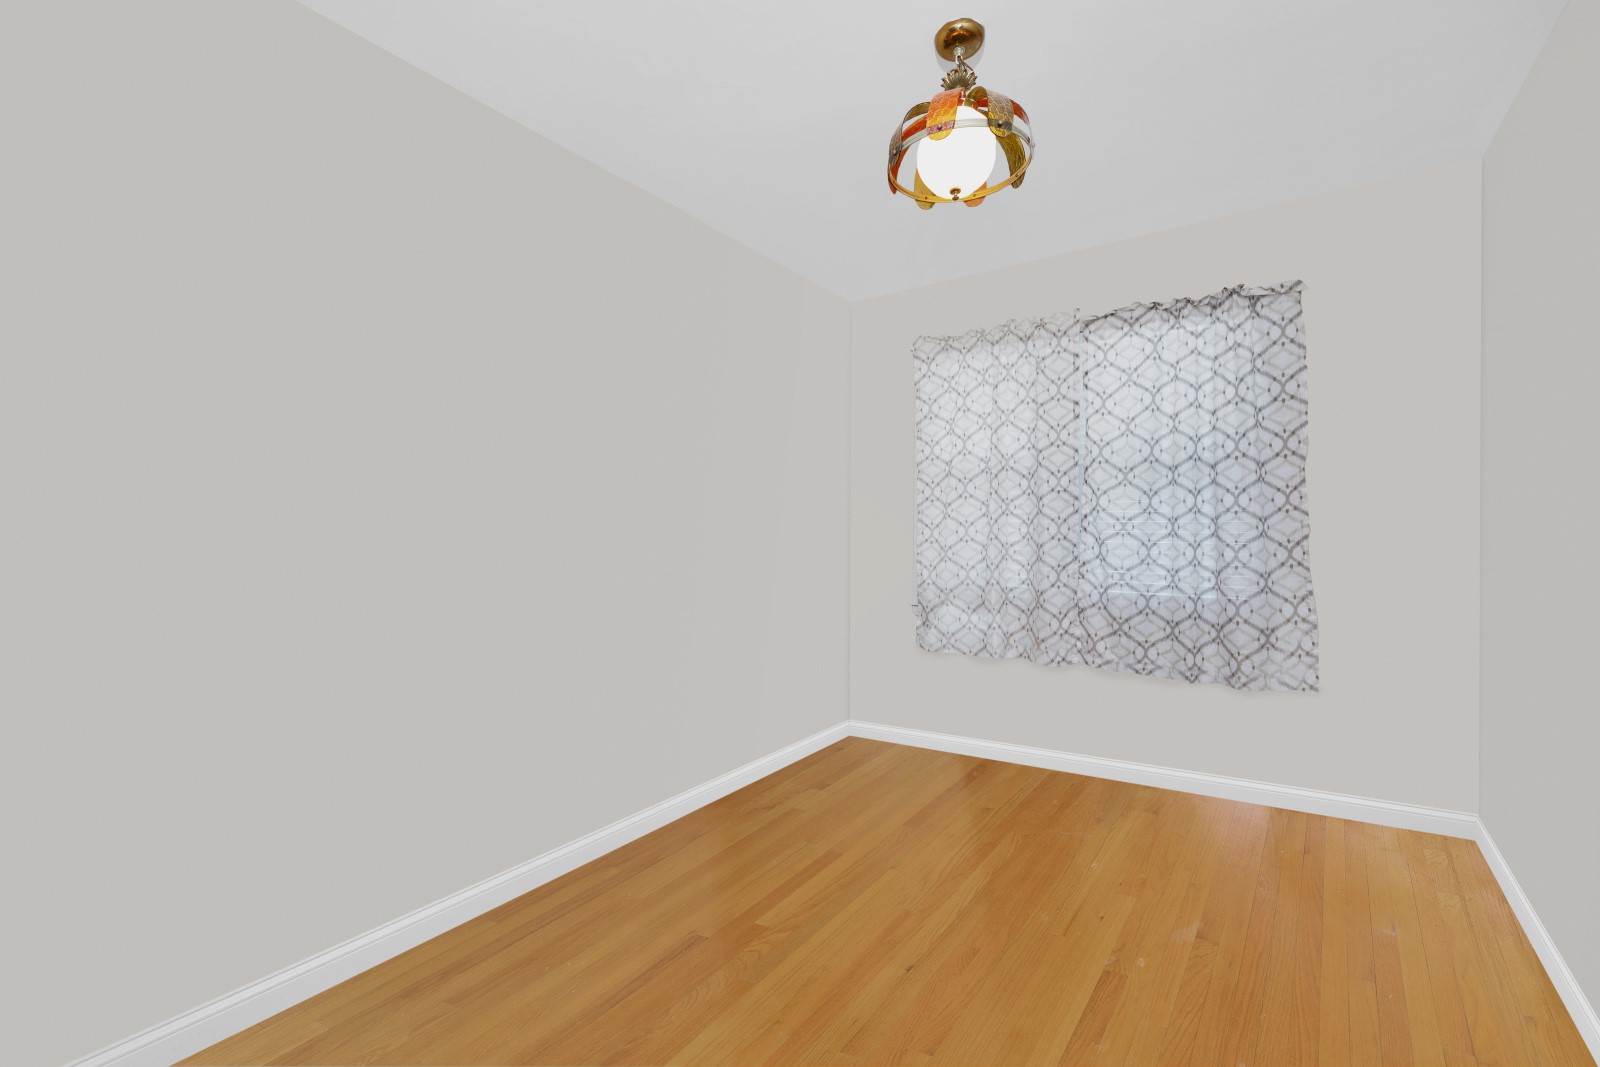 69-18 66th Road, Middle Village, New York, 11379, United States, 7 Bedrooms Bedrooms, ,5 BathroomsBathrooms,Residential,For Sale,69-18 66th Road,1512481